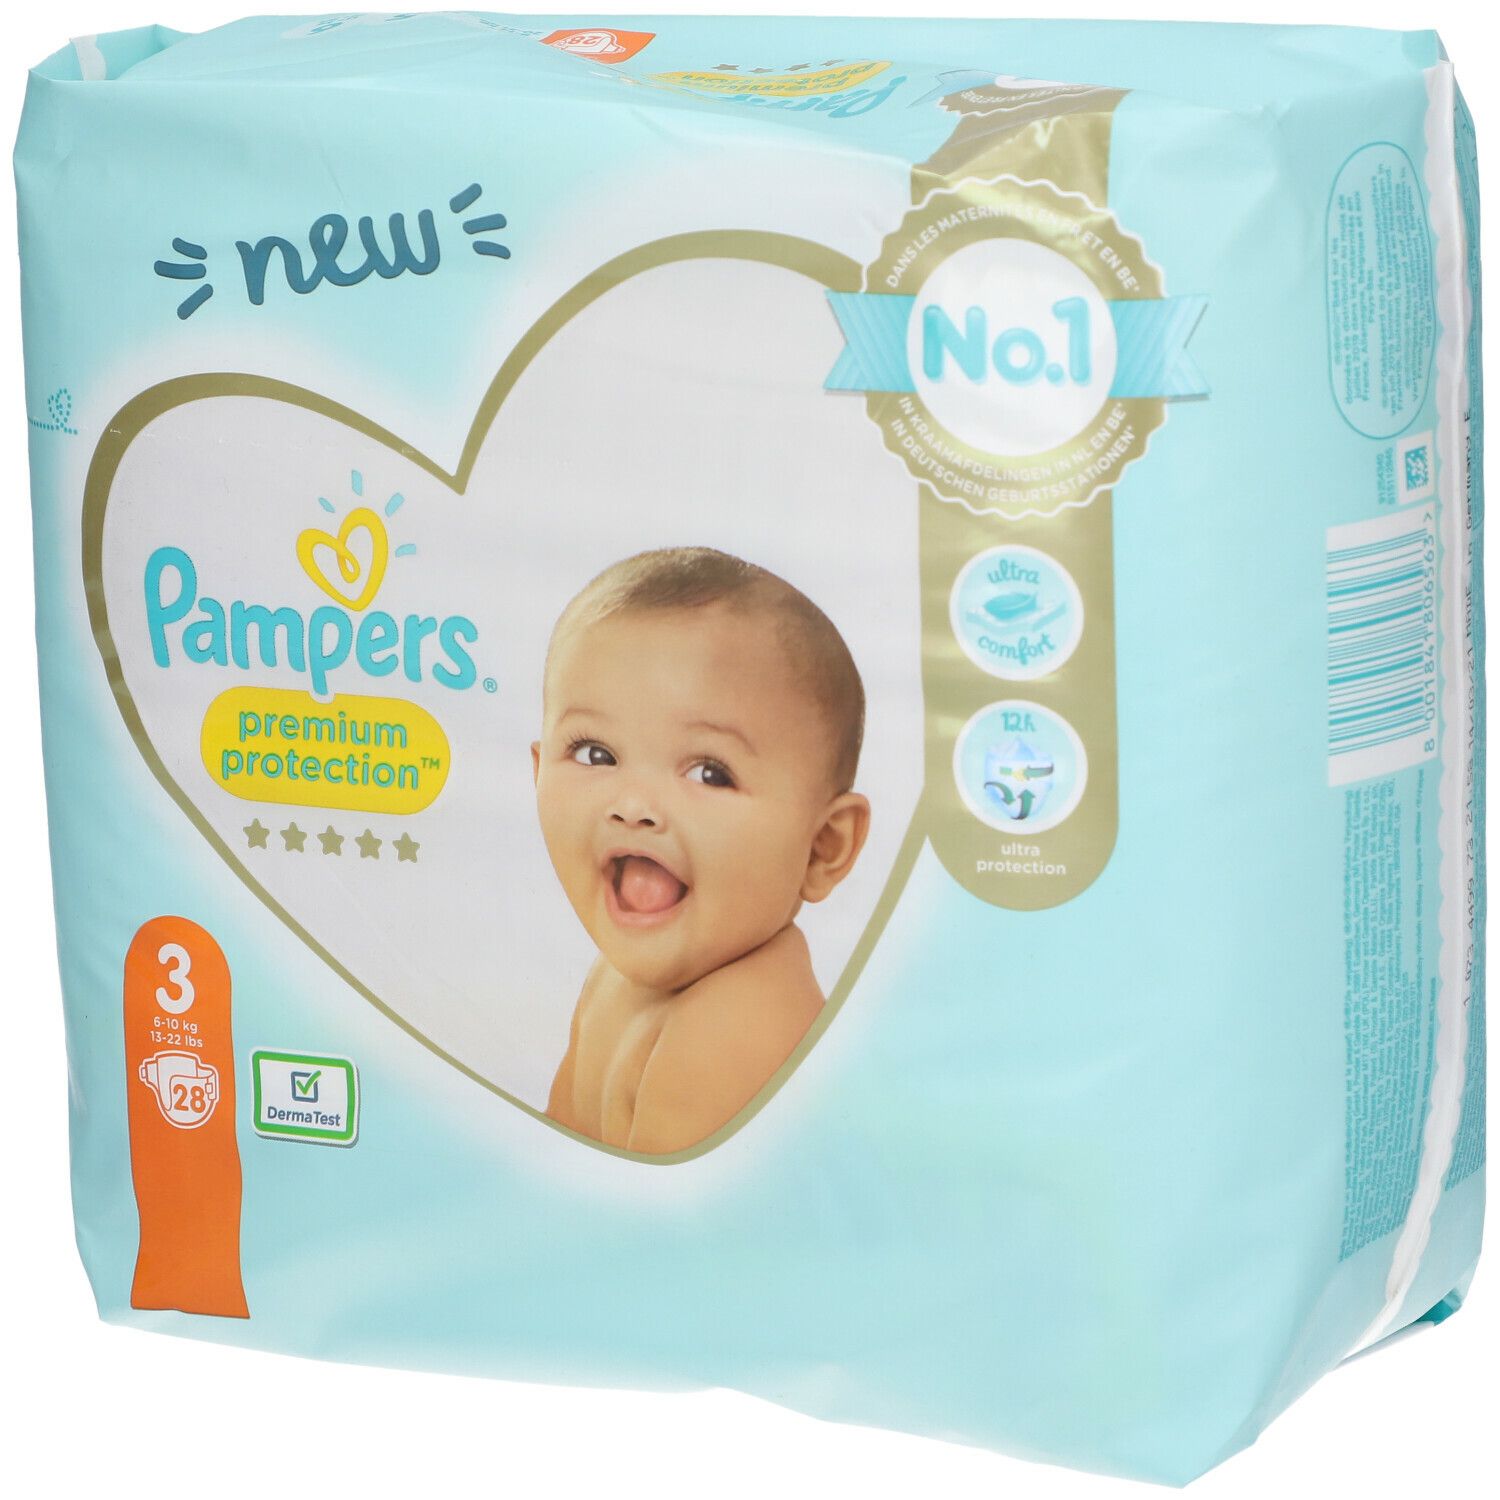 Pack 46 couches PAMPERS Premium Protection Taille 3 (6 à 10KG) Bébé Baby  Comfort